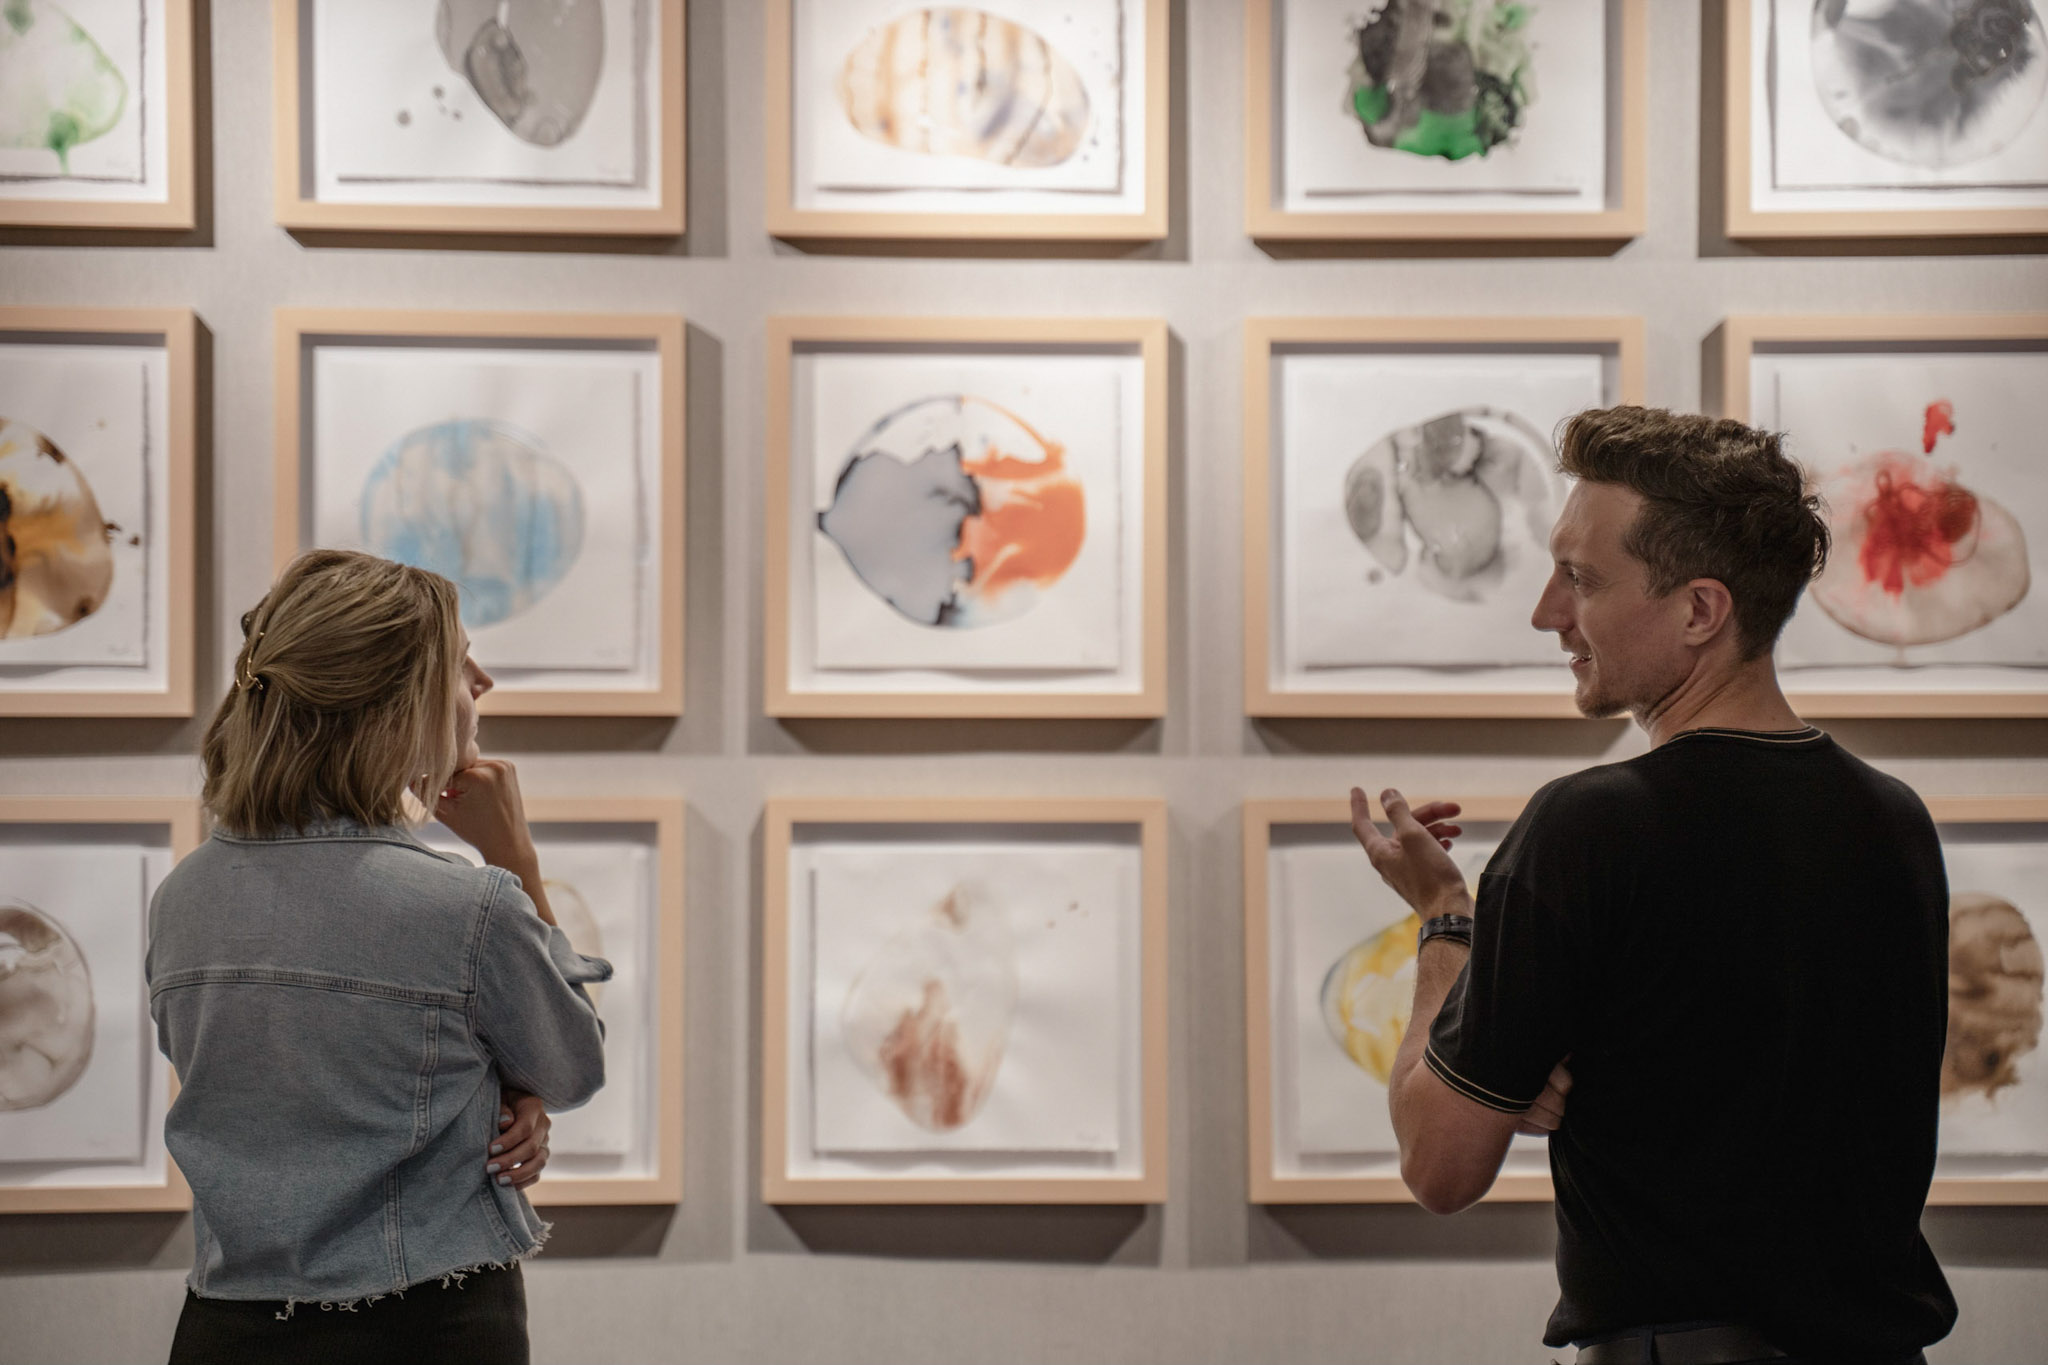 Two people standing in front of a wall of framed paintings deep in conversation.